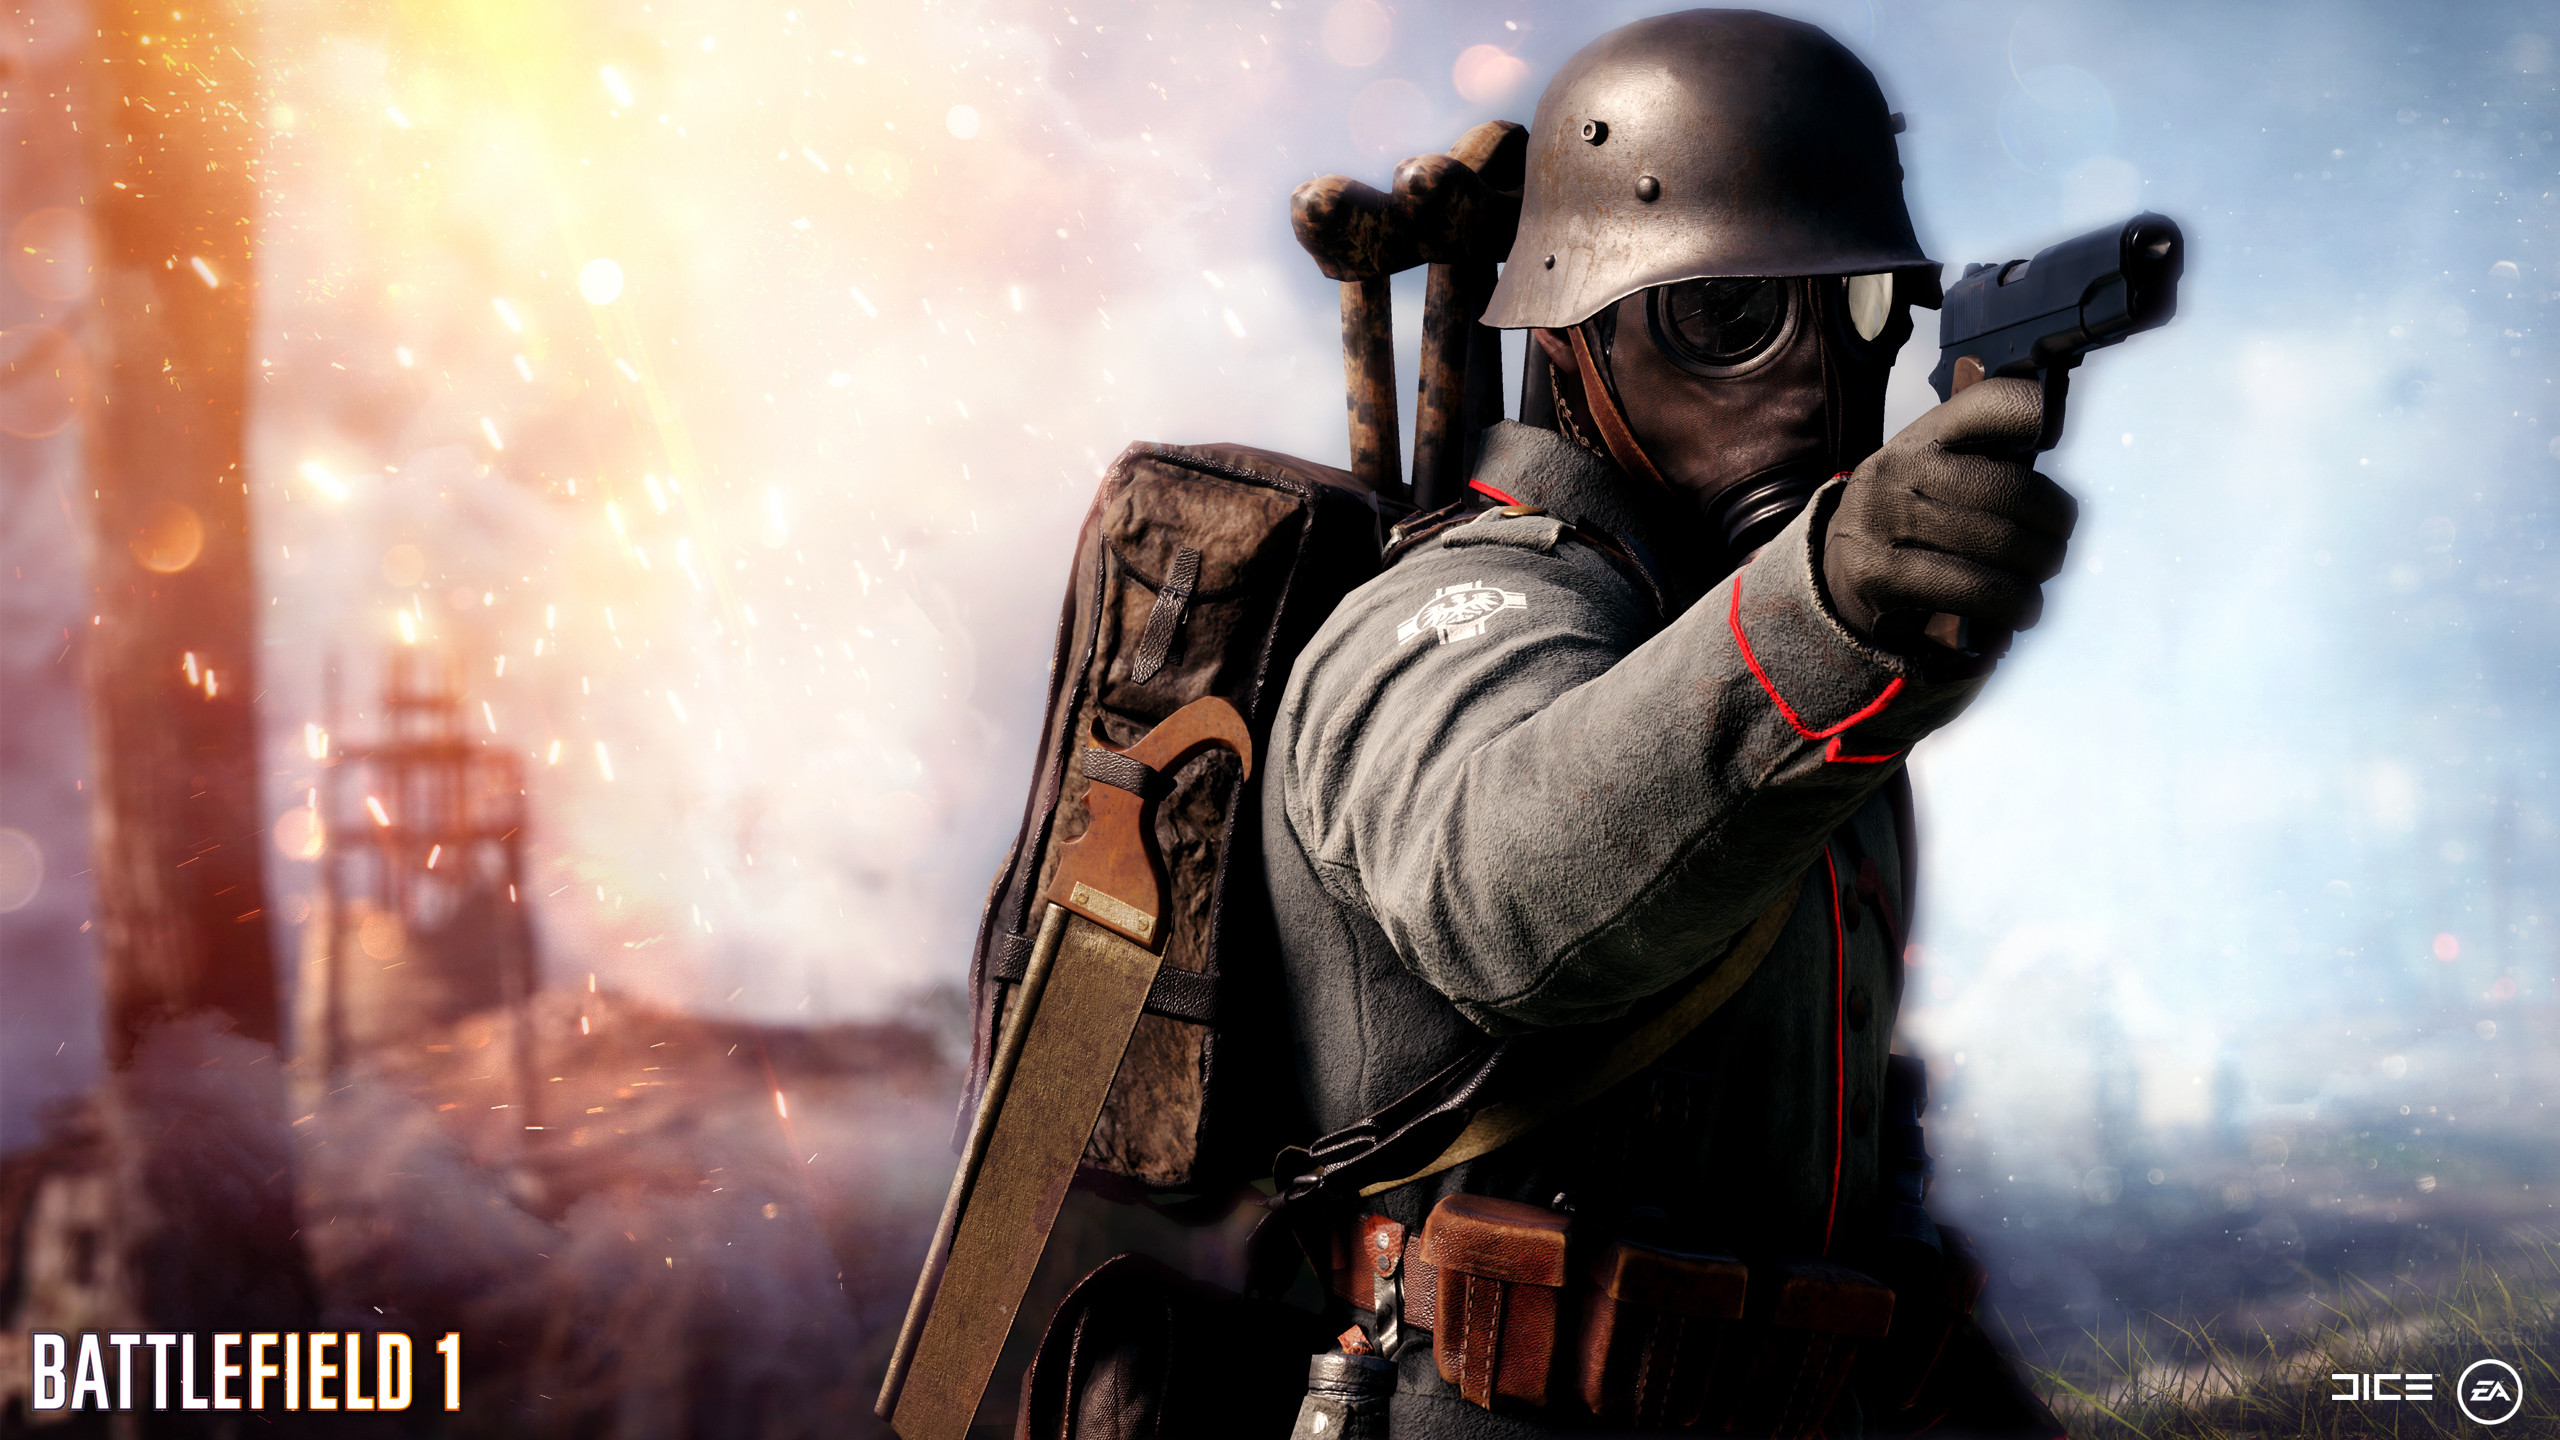 2560x1440 ... Battlefield 1 HD Images 4 | Battlefield 1 HD Images | Pinterest ...  Epic Wallpapers ...